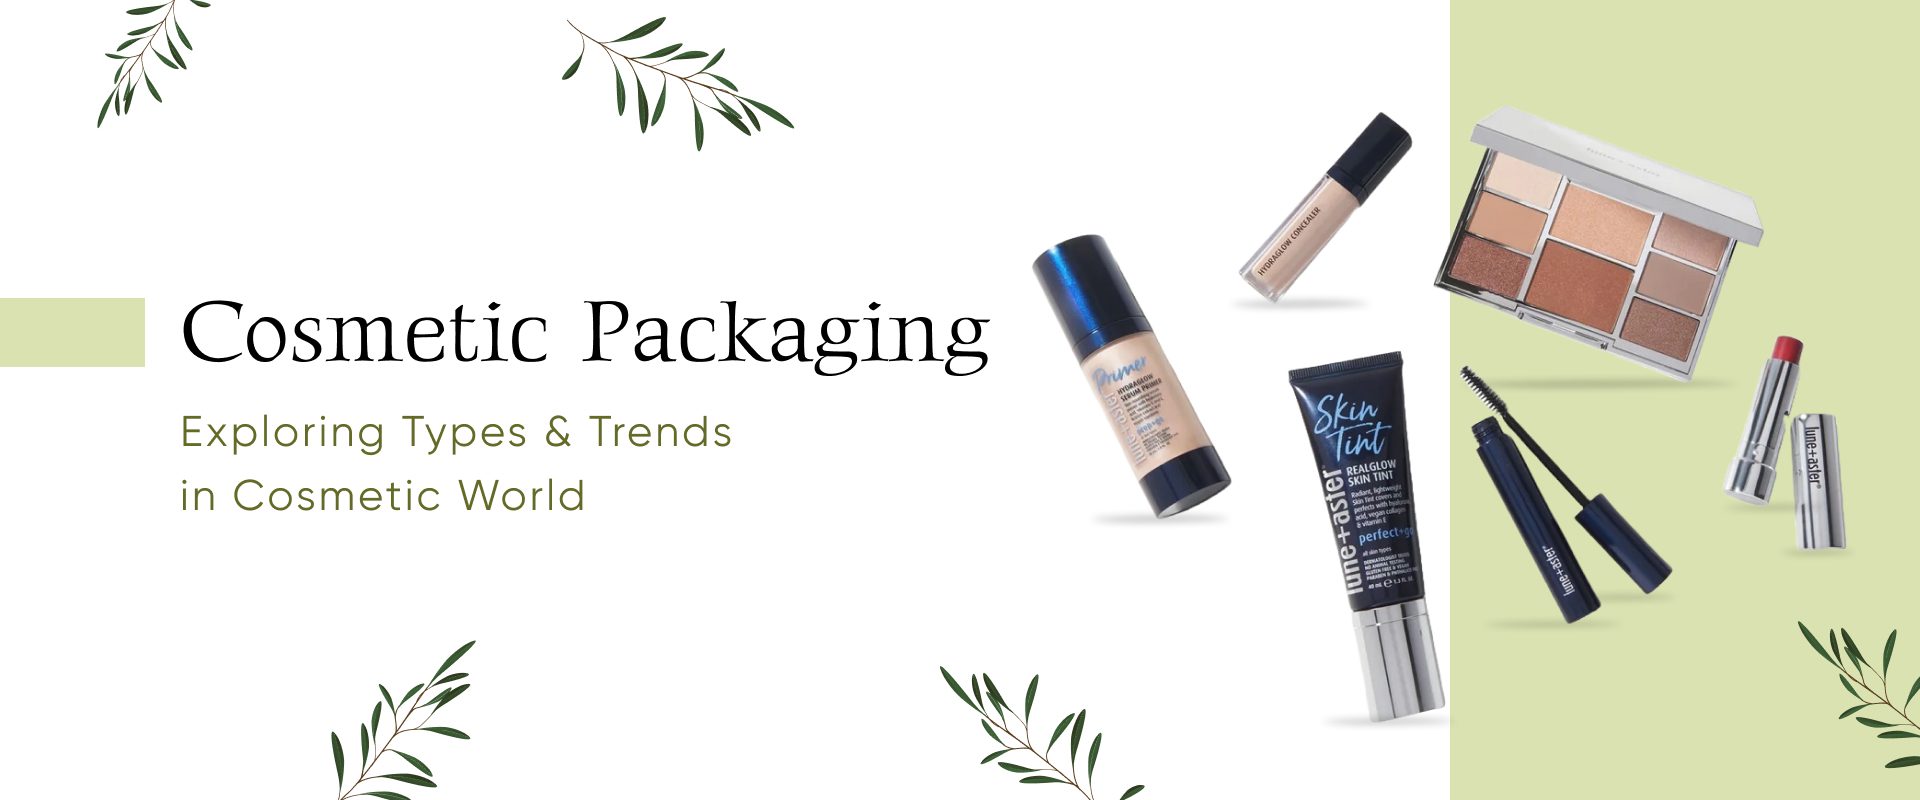 Cosmetic Packaging Exploring Types and Trends in the Cosmetic World